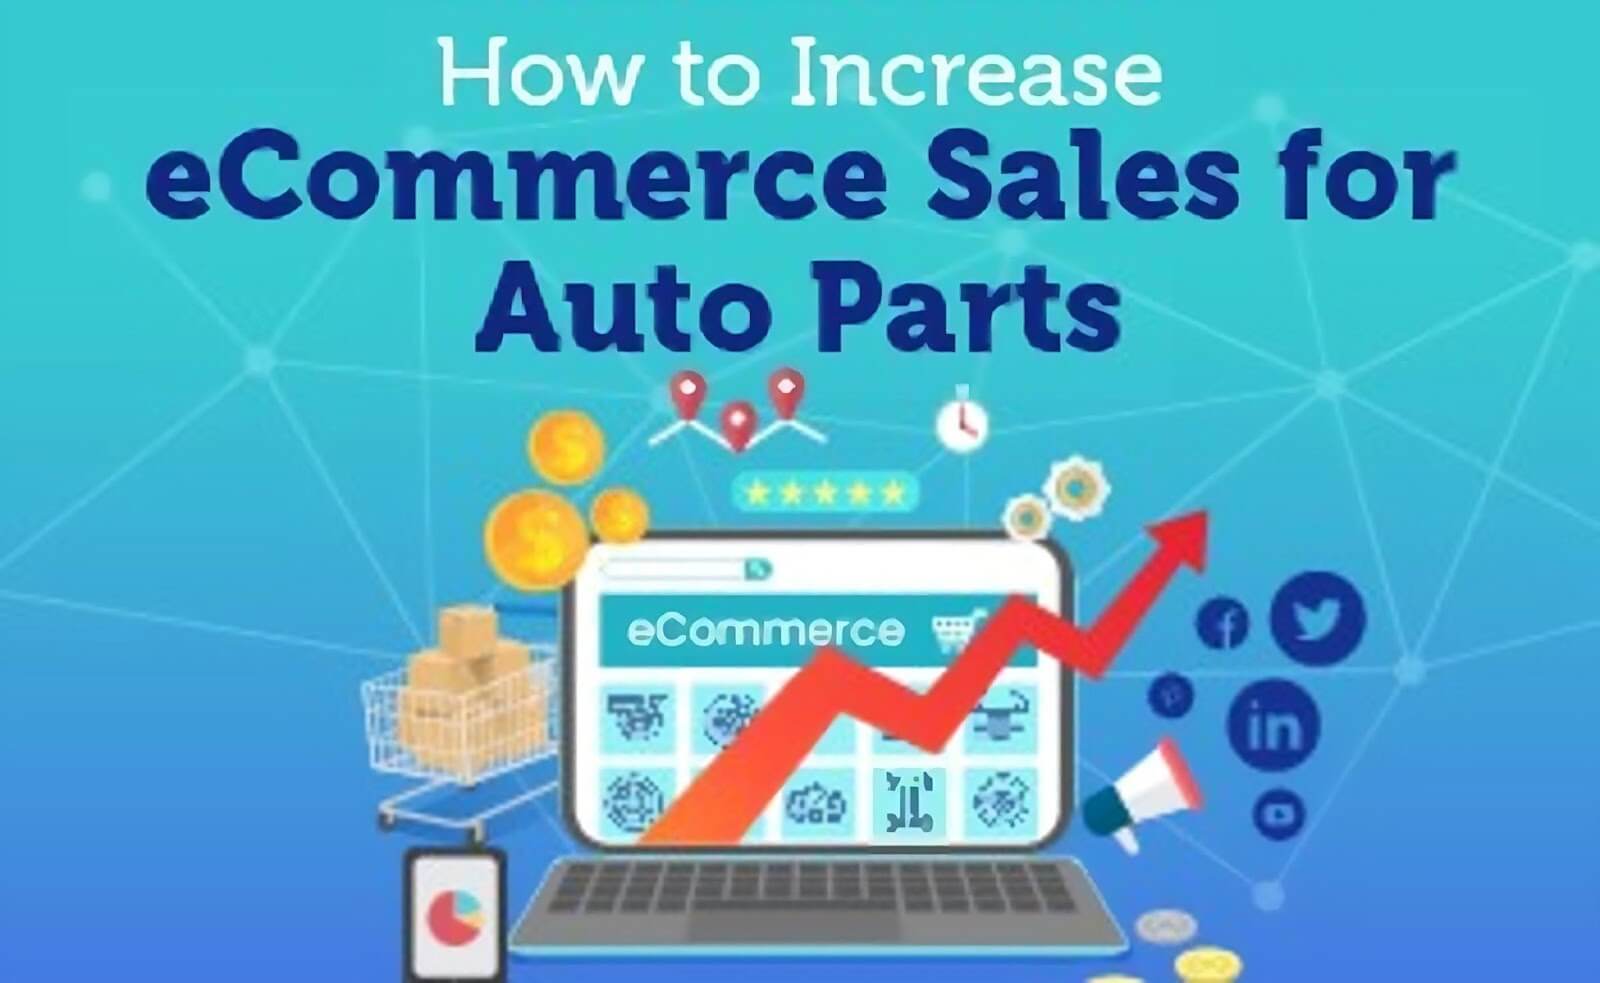 How to Build an Auto Parts ECommerce Site that Converts